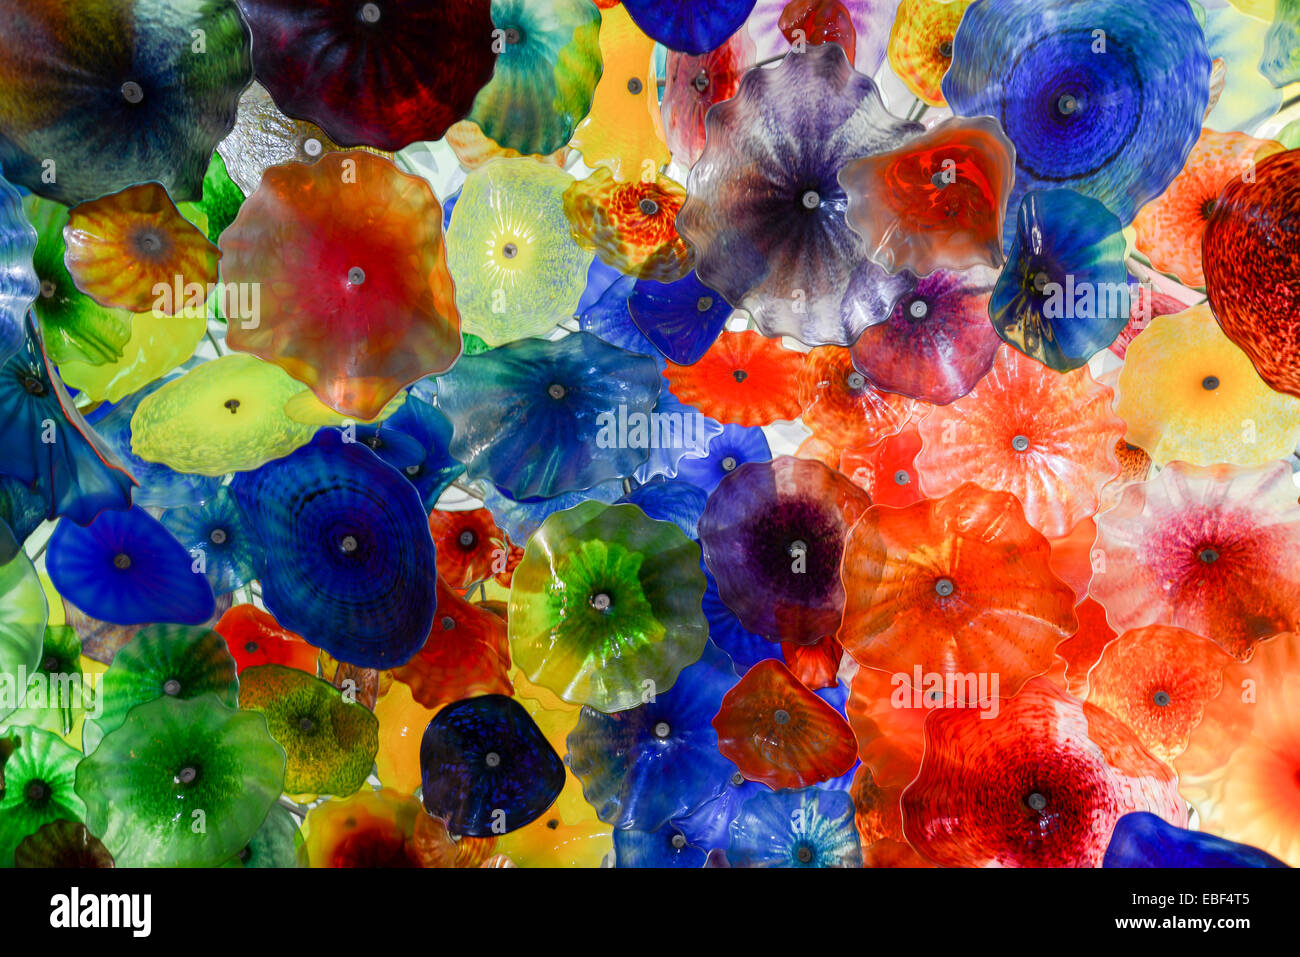 Hand Blown Glass Flower Ceiling at the Bellagio Hotel by Artist Dale Chihuly Stock Photo